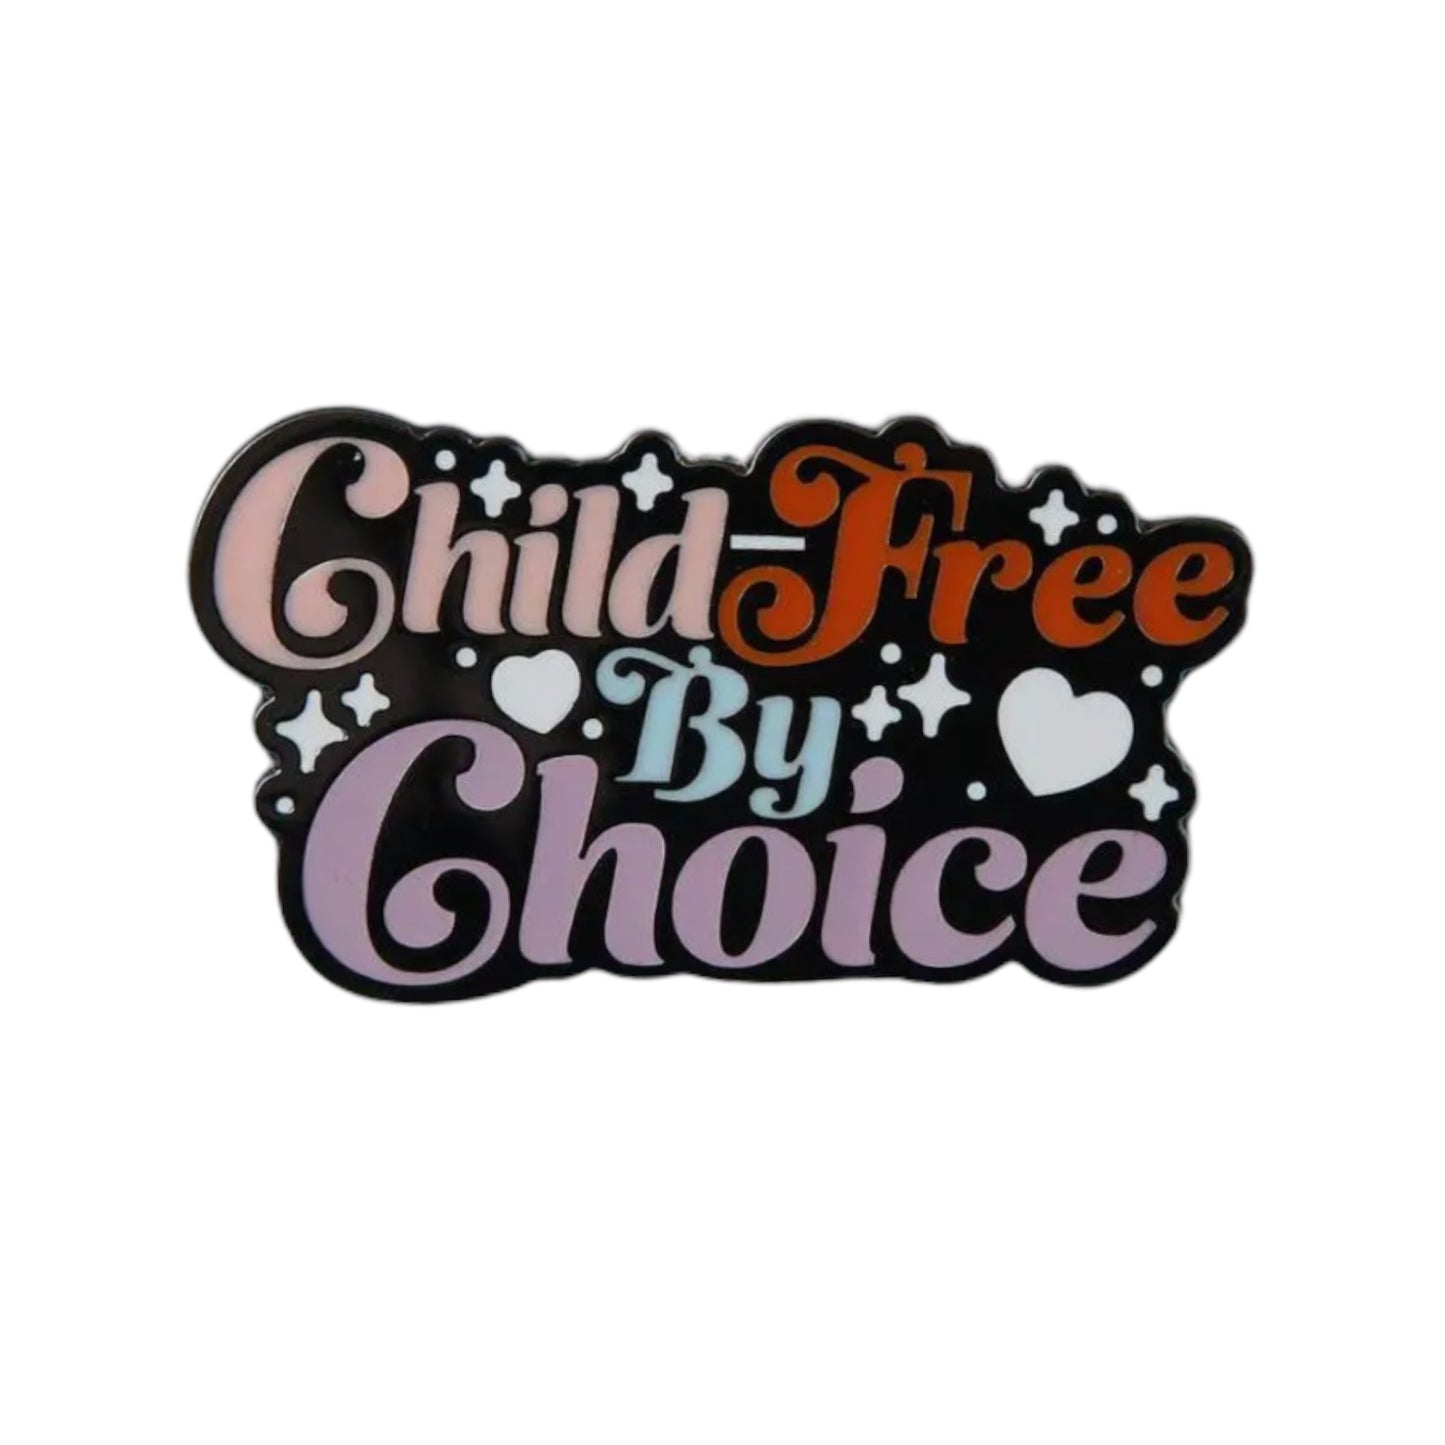 Child Free by Choice